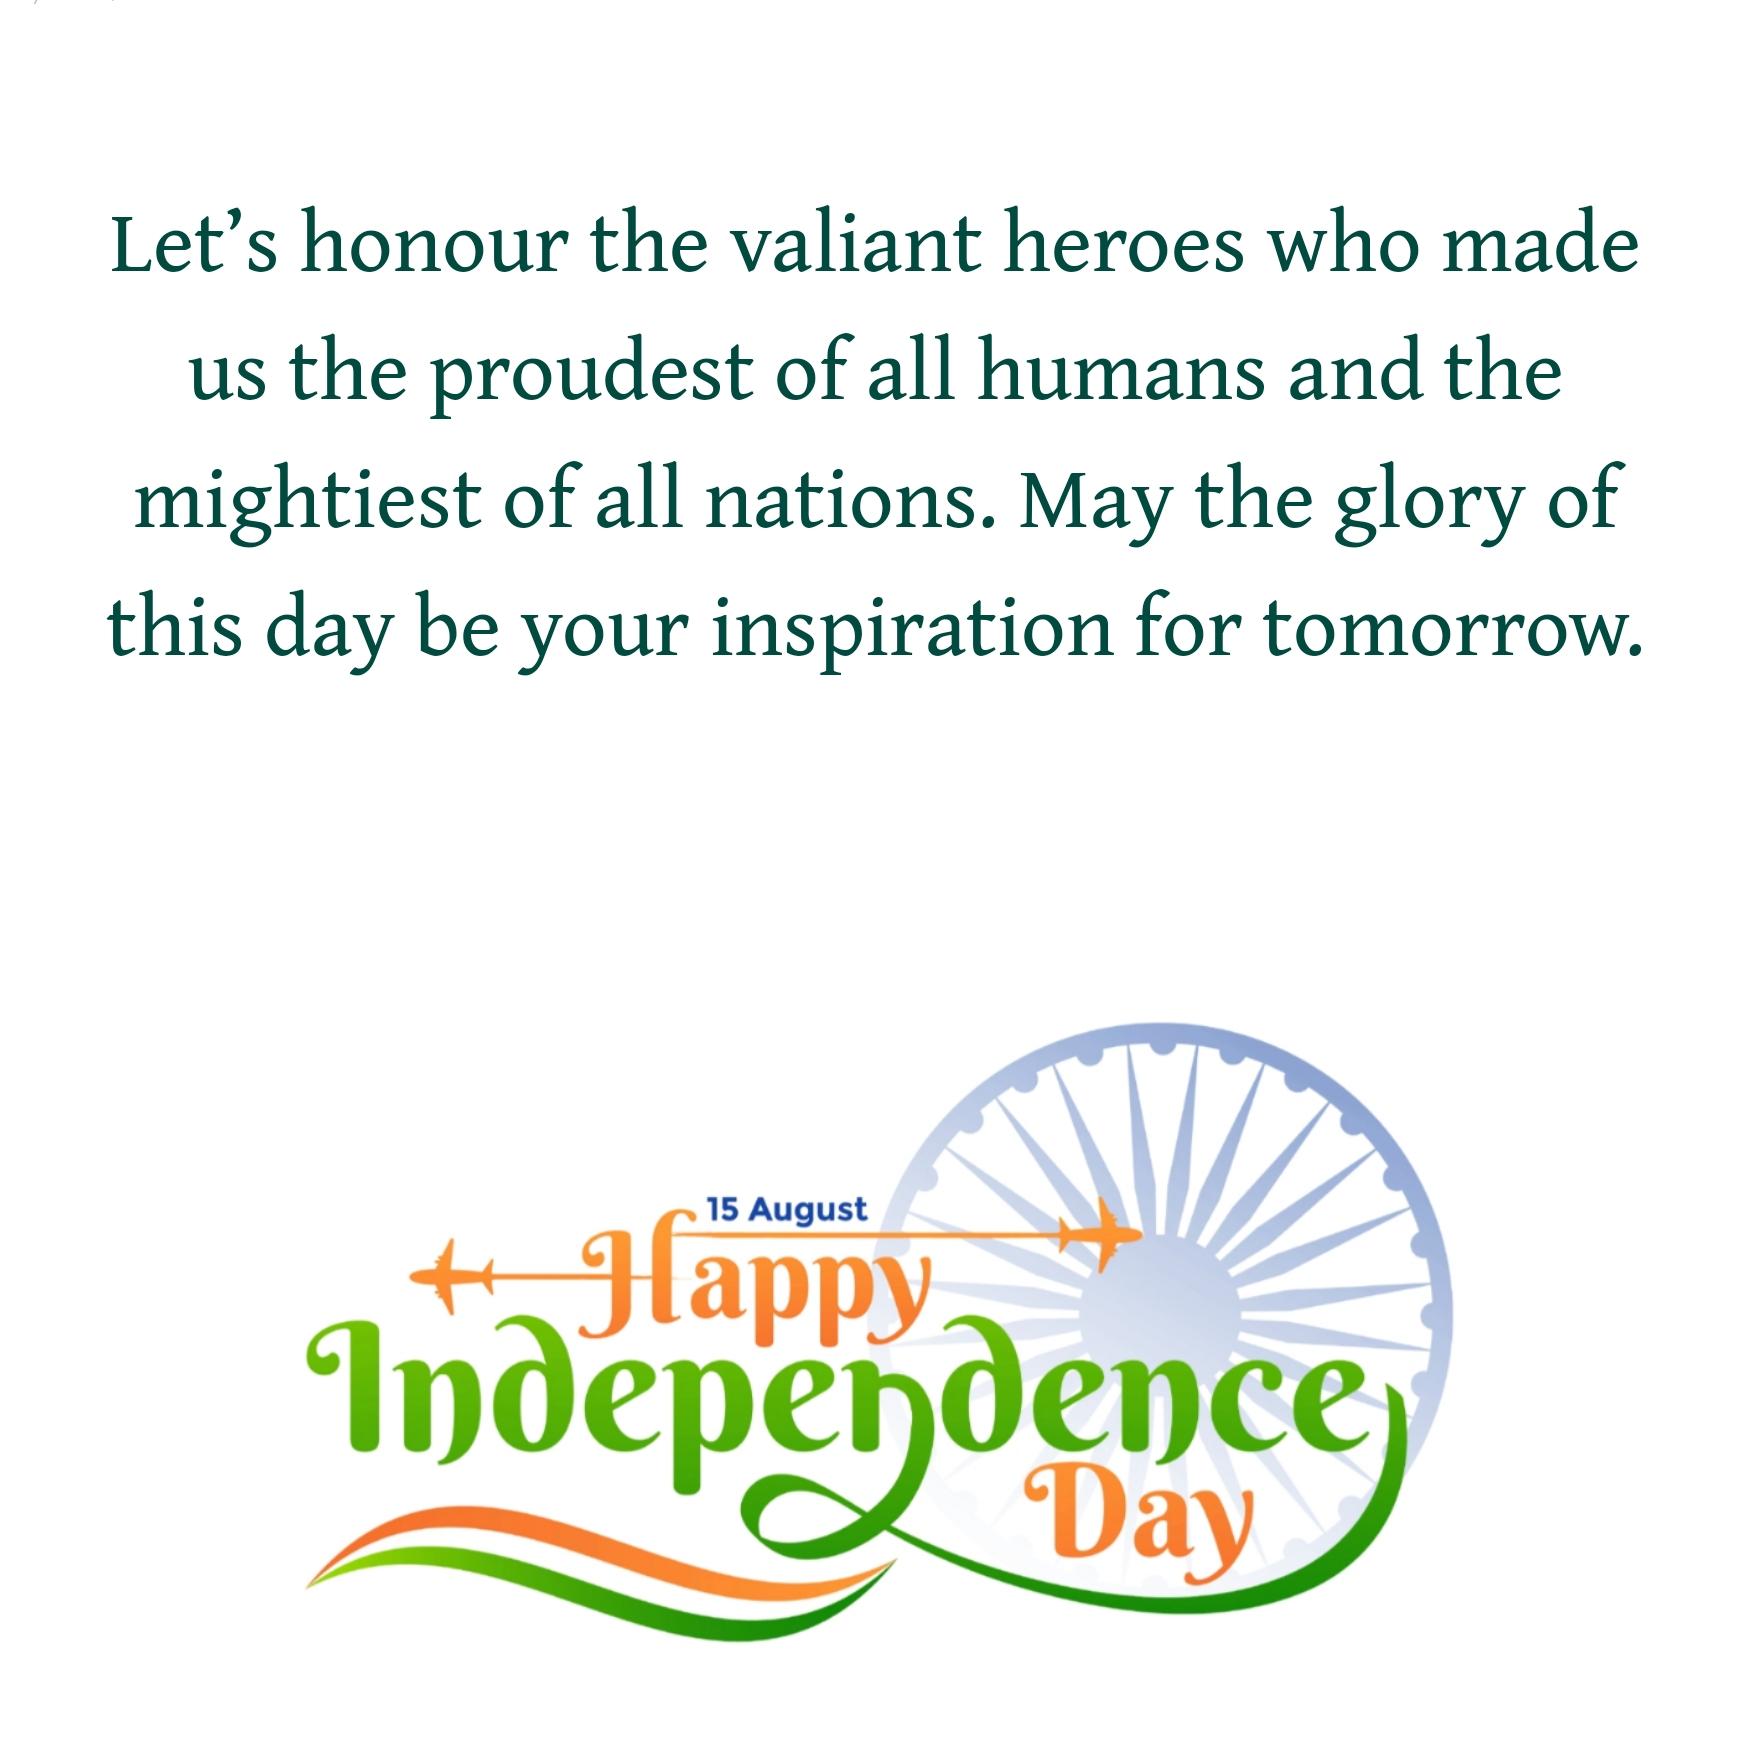 Lets honour the valiant heroes who made us the proudest